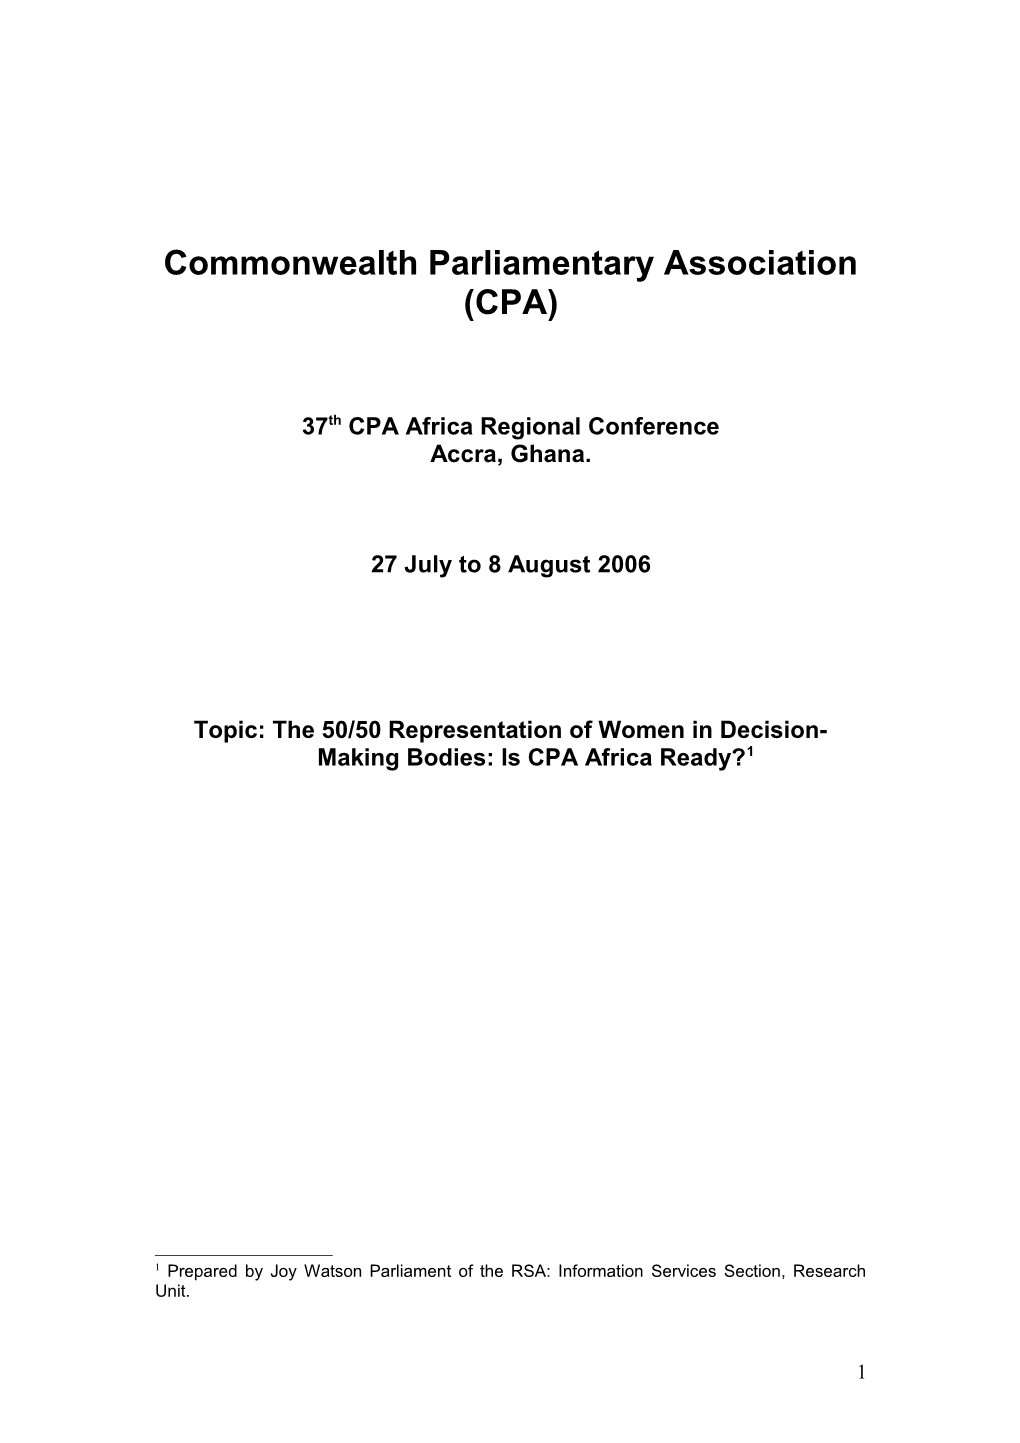 Commonwealth Parliamentary Association (CPA)